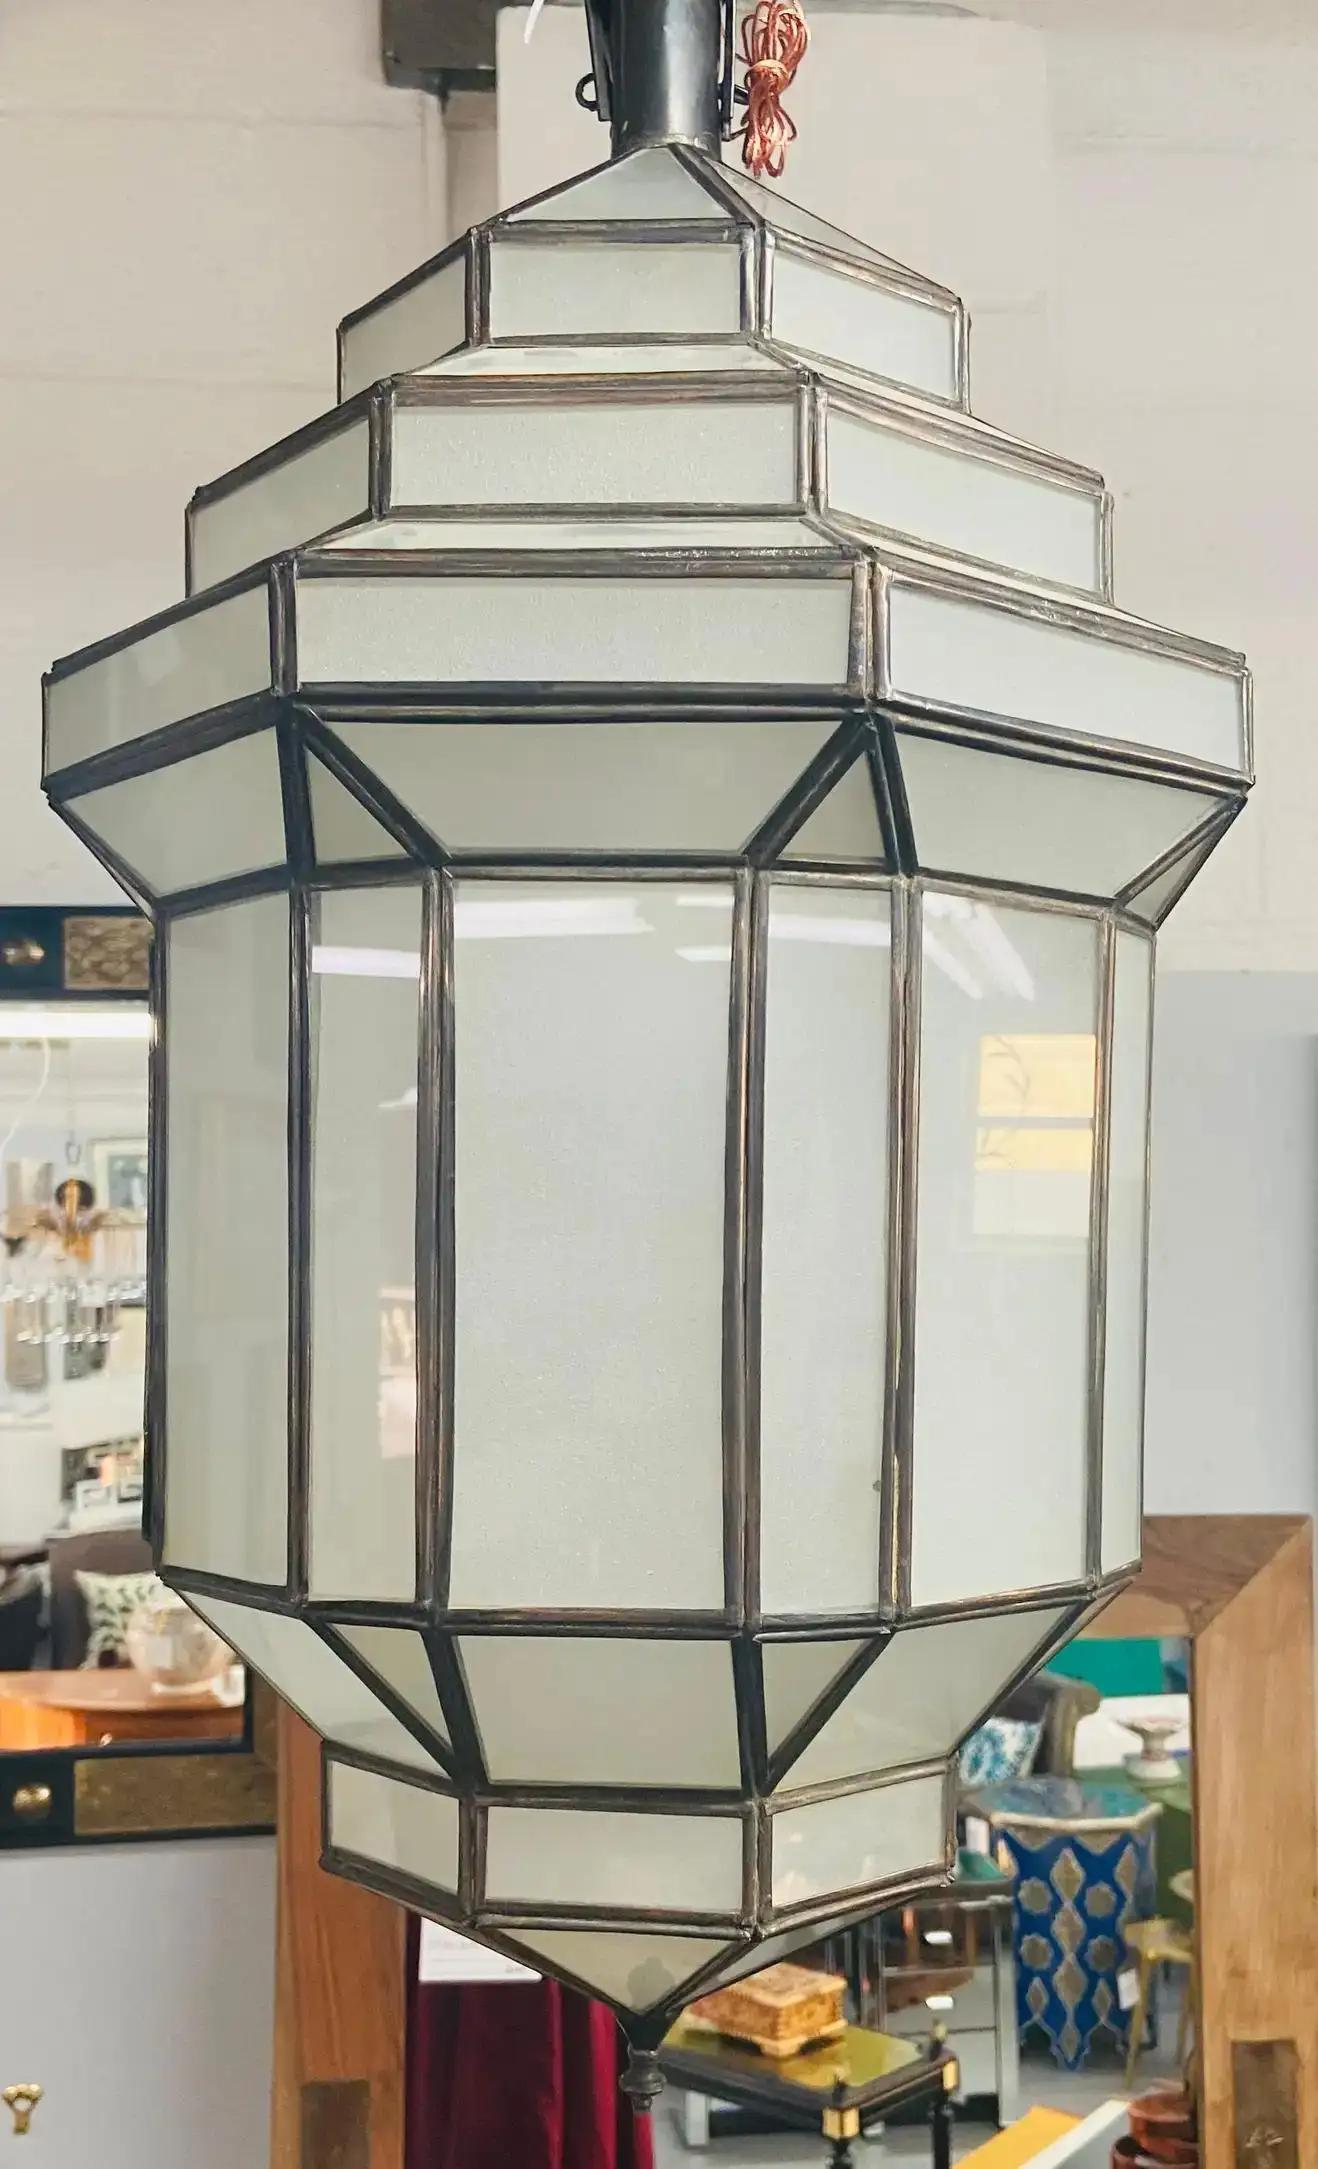 Art Deco style white milk glass handmade chandelier, pendant, lantern, a pair.
A gorgeous handcrafted with individual panels, this pair of Art Deco hanging lanterns or ceiling fixtures features sandblasted frosted milky glass and patinated metal